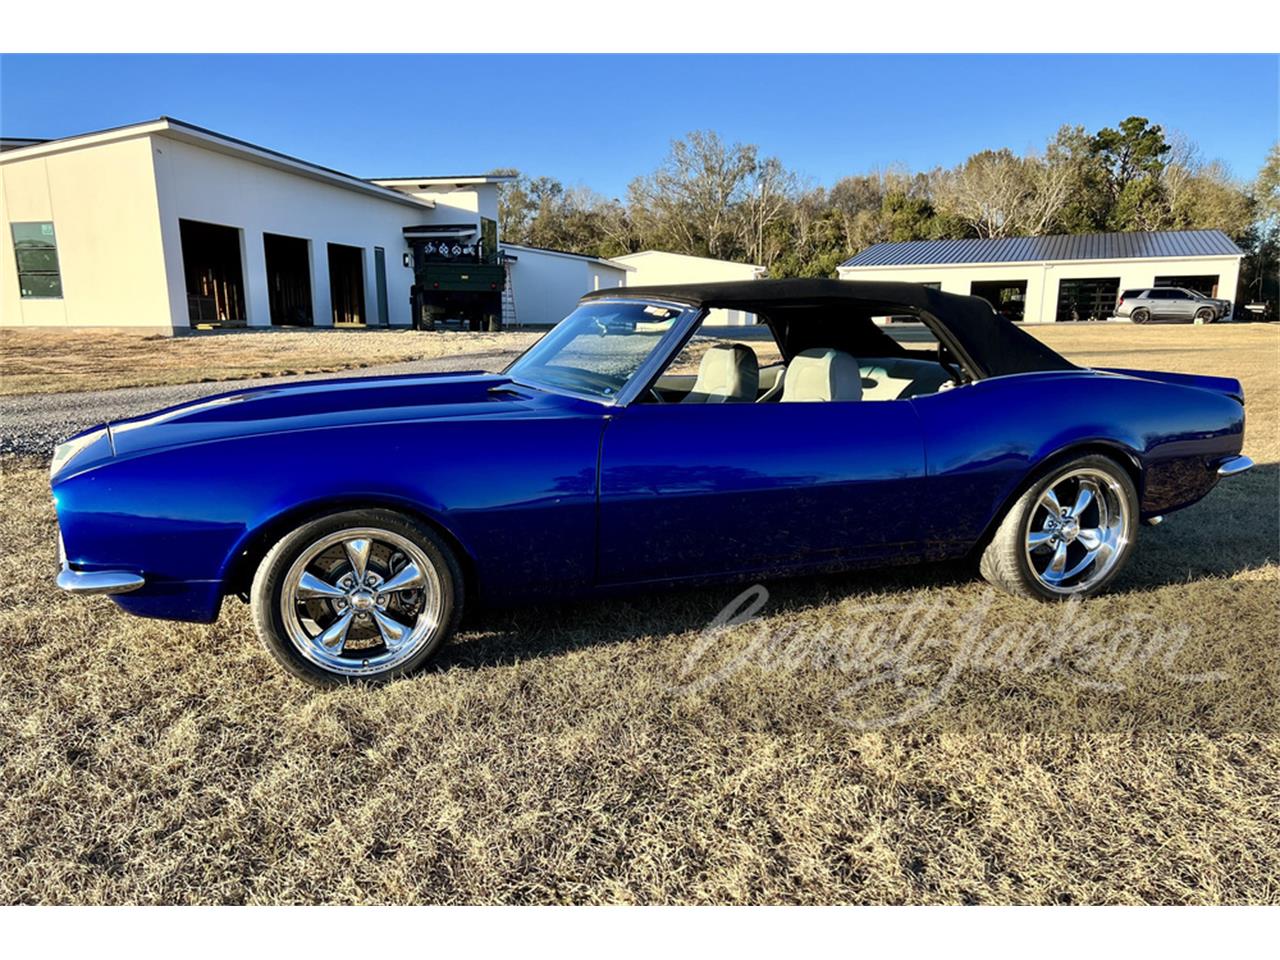 For Sale at Auction: 1967 Chevrolet Camaro in Scottsdale, Arizona for sale in Scottsdale, AZ